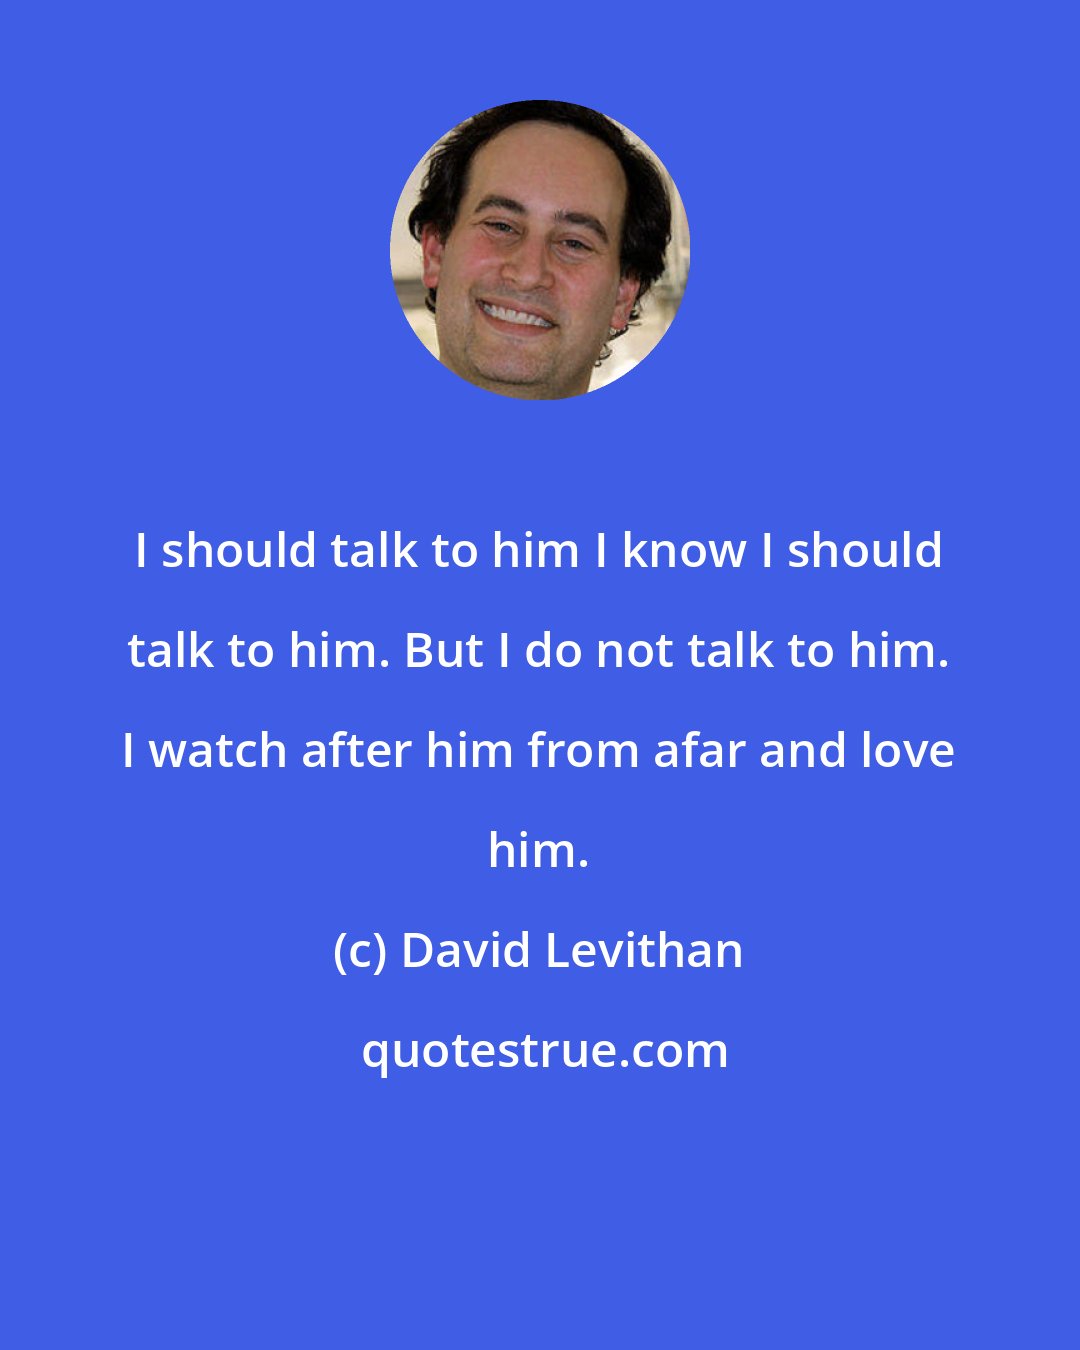 David Levithan: I should talk to him I know I should talk to him. But I do not talk to him. I watch after him from afar and love him.